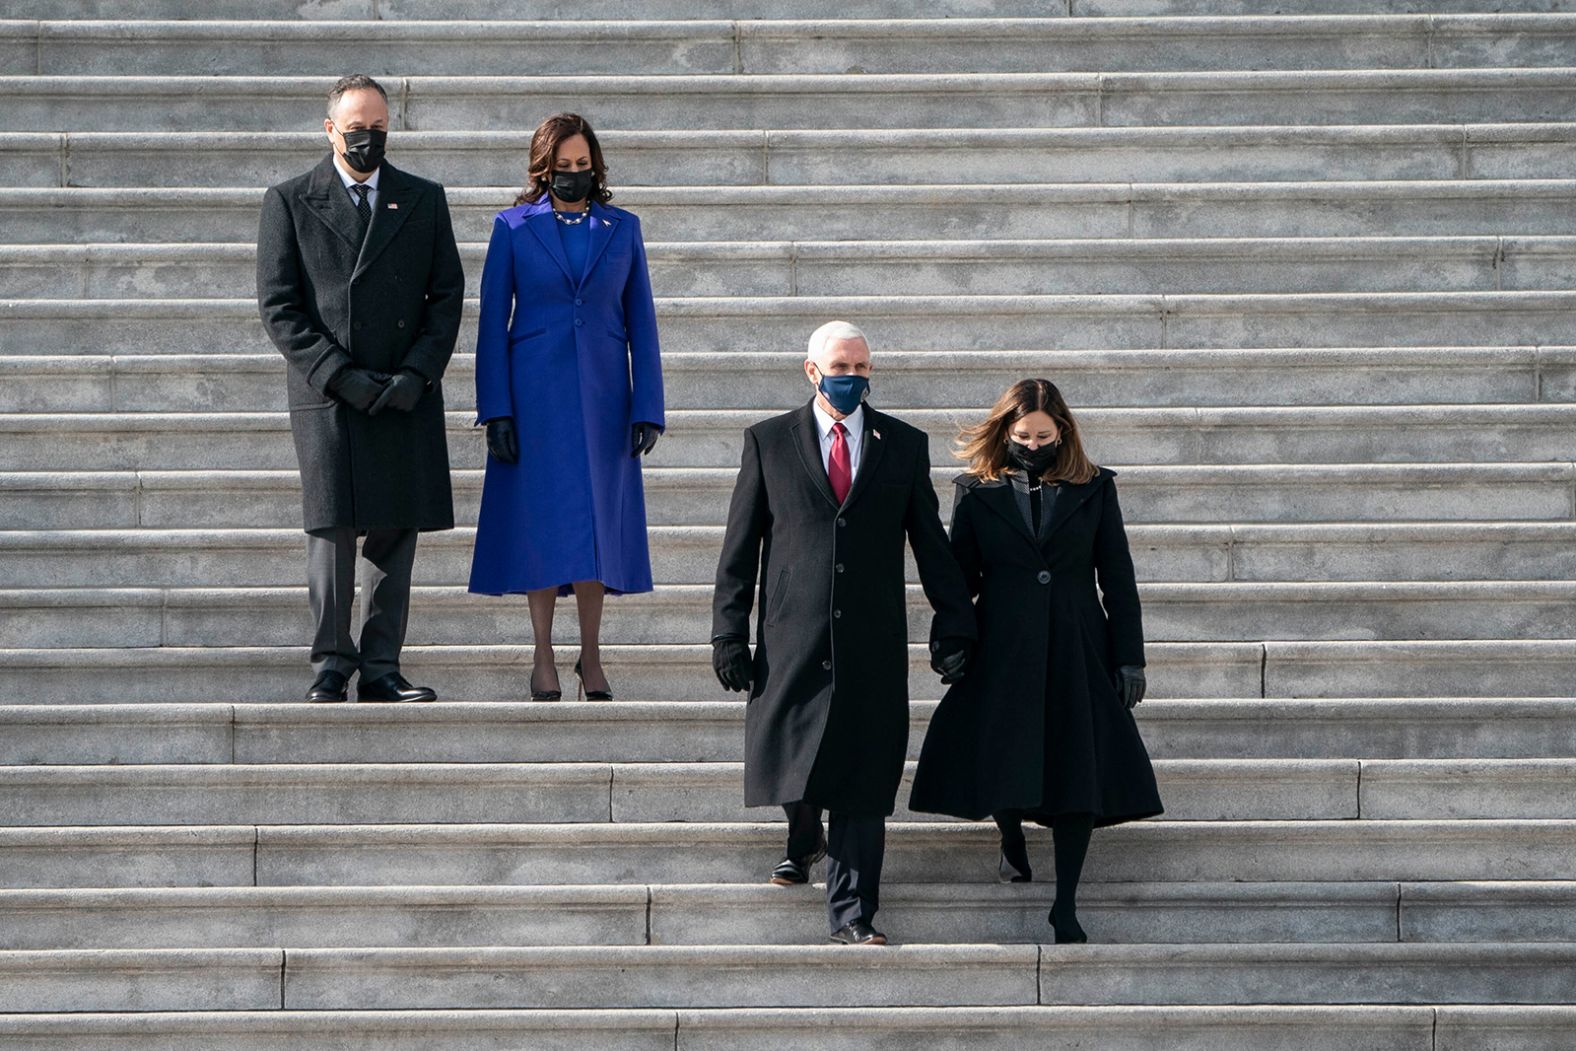 Pence and his wife, Karen, are trailed by his successor, Kamala Harris, and her husband, Doug Emhoff, after <a href="http://www.cnn.com/2021/01/19/politics/gallery/joe-biden-inauguration-photos/index.html" target="_blank">the inauguration</a> in January 2021.